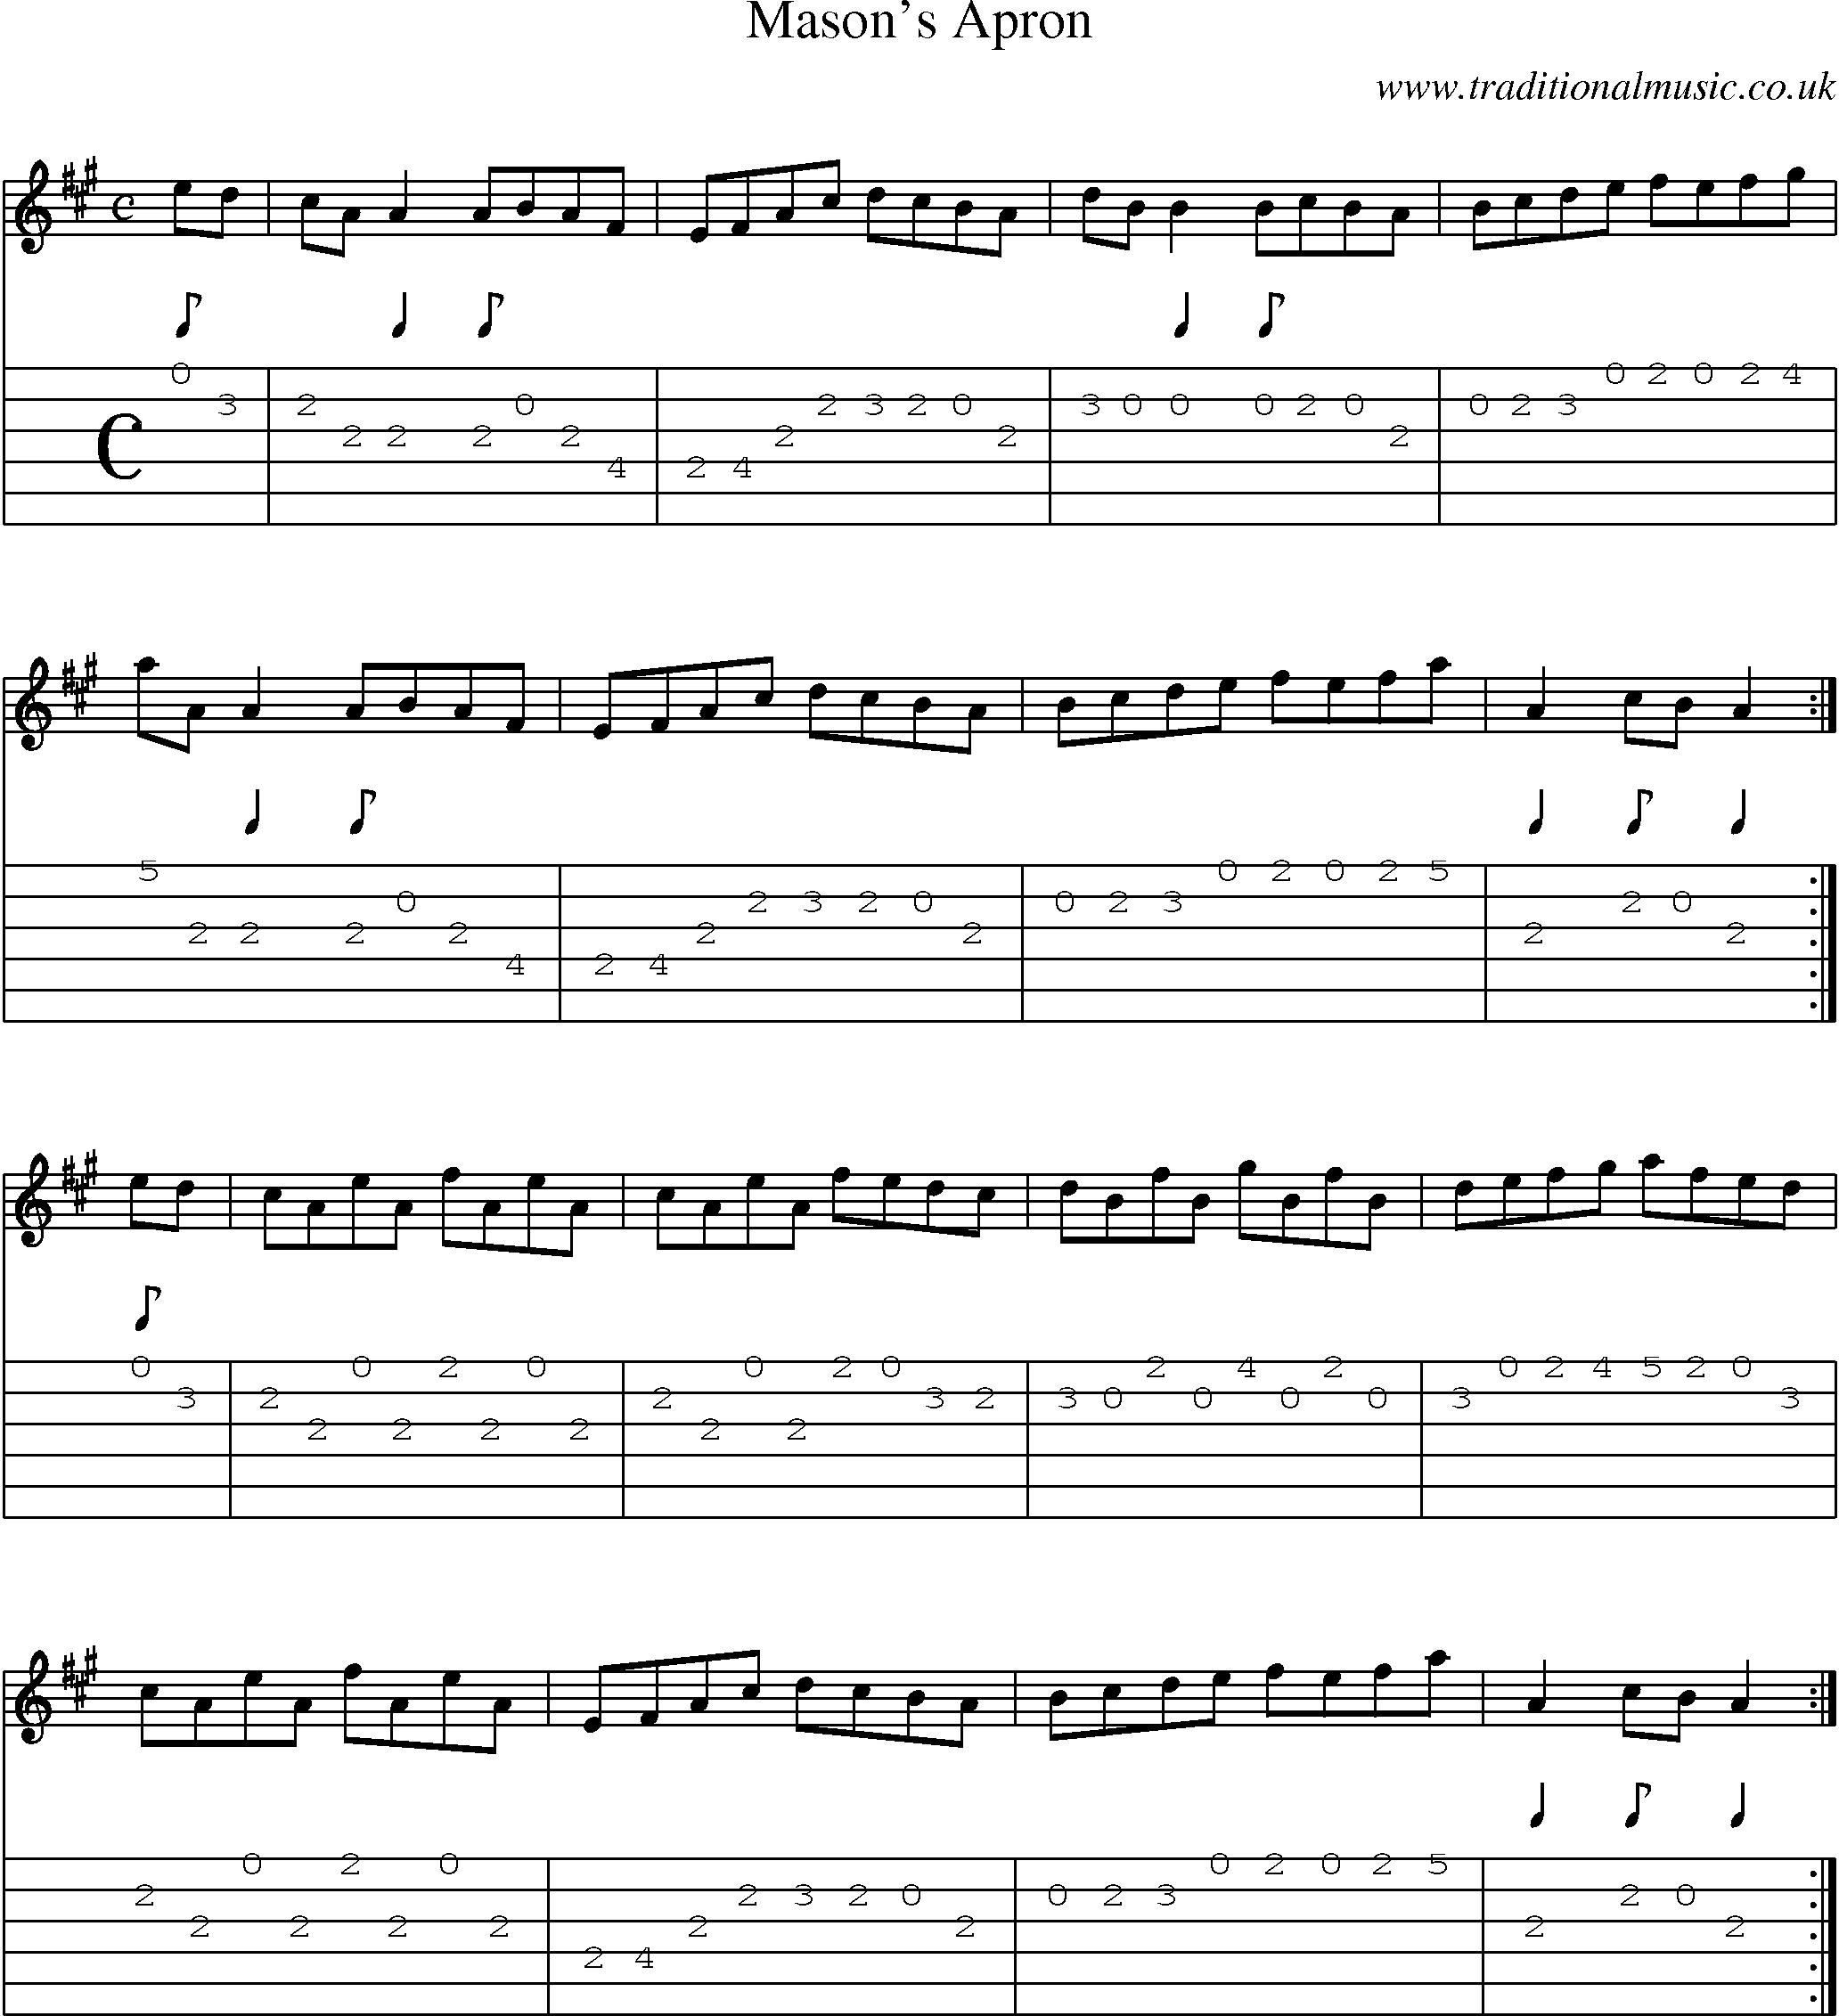 Music Score and Guitar Tabs for Masons Apron